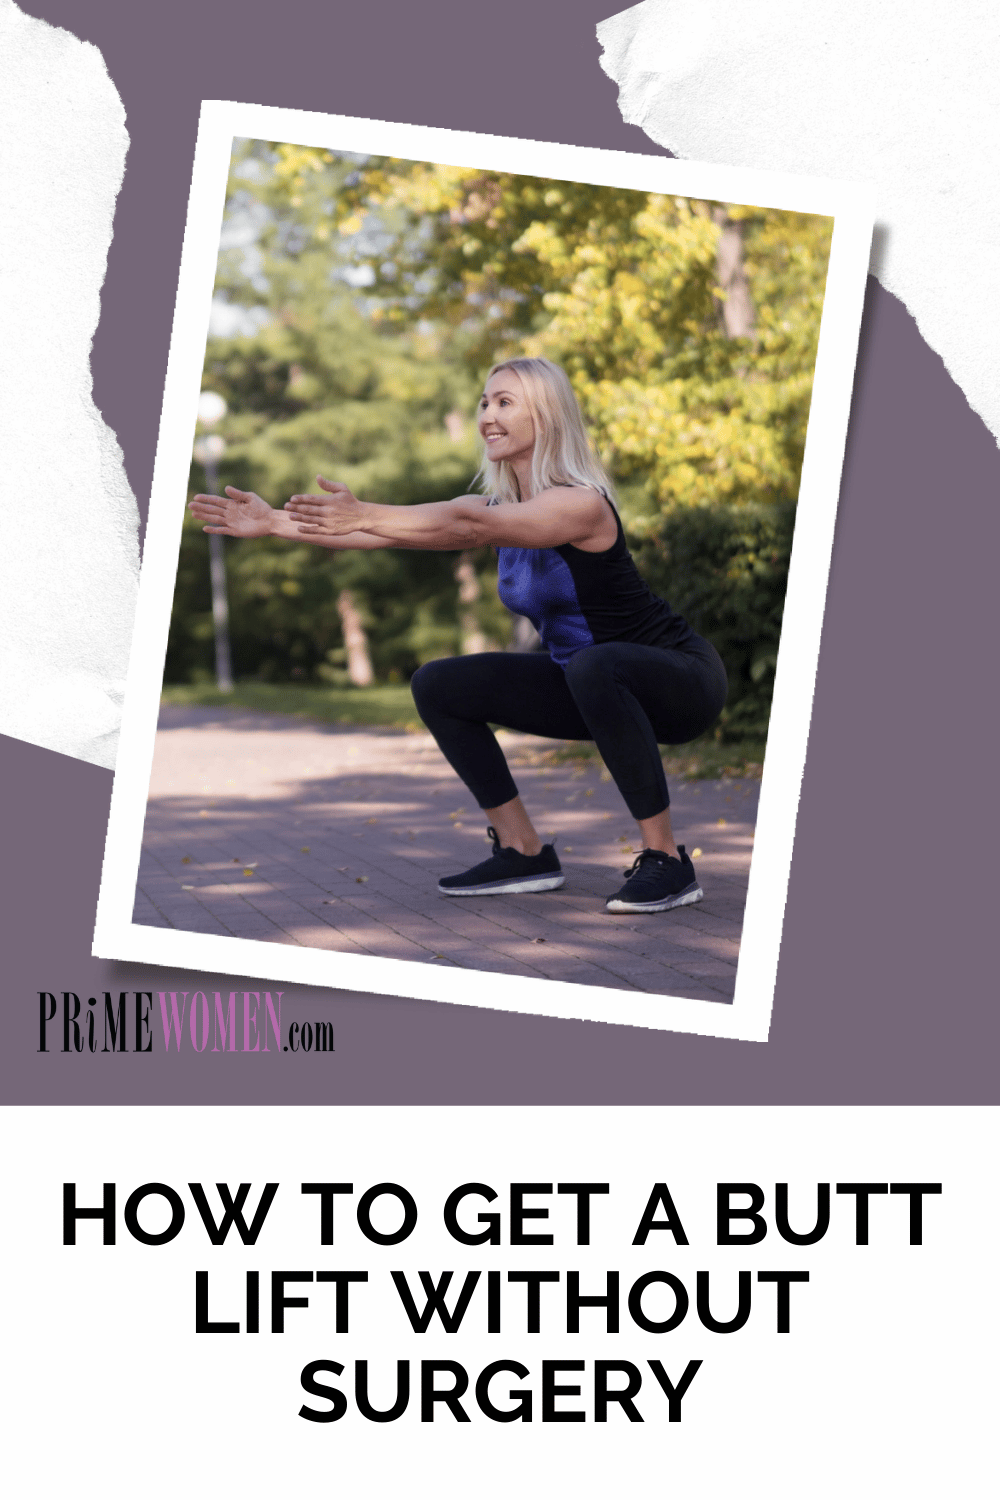 How to get a butt lift without surgery